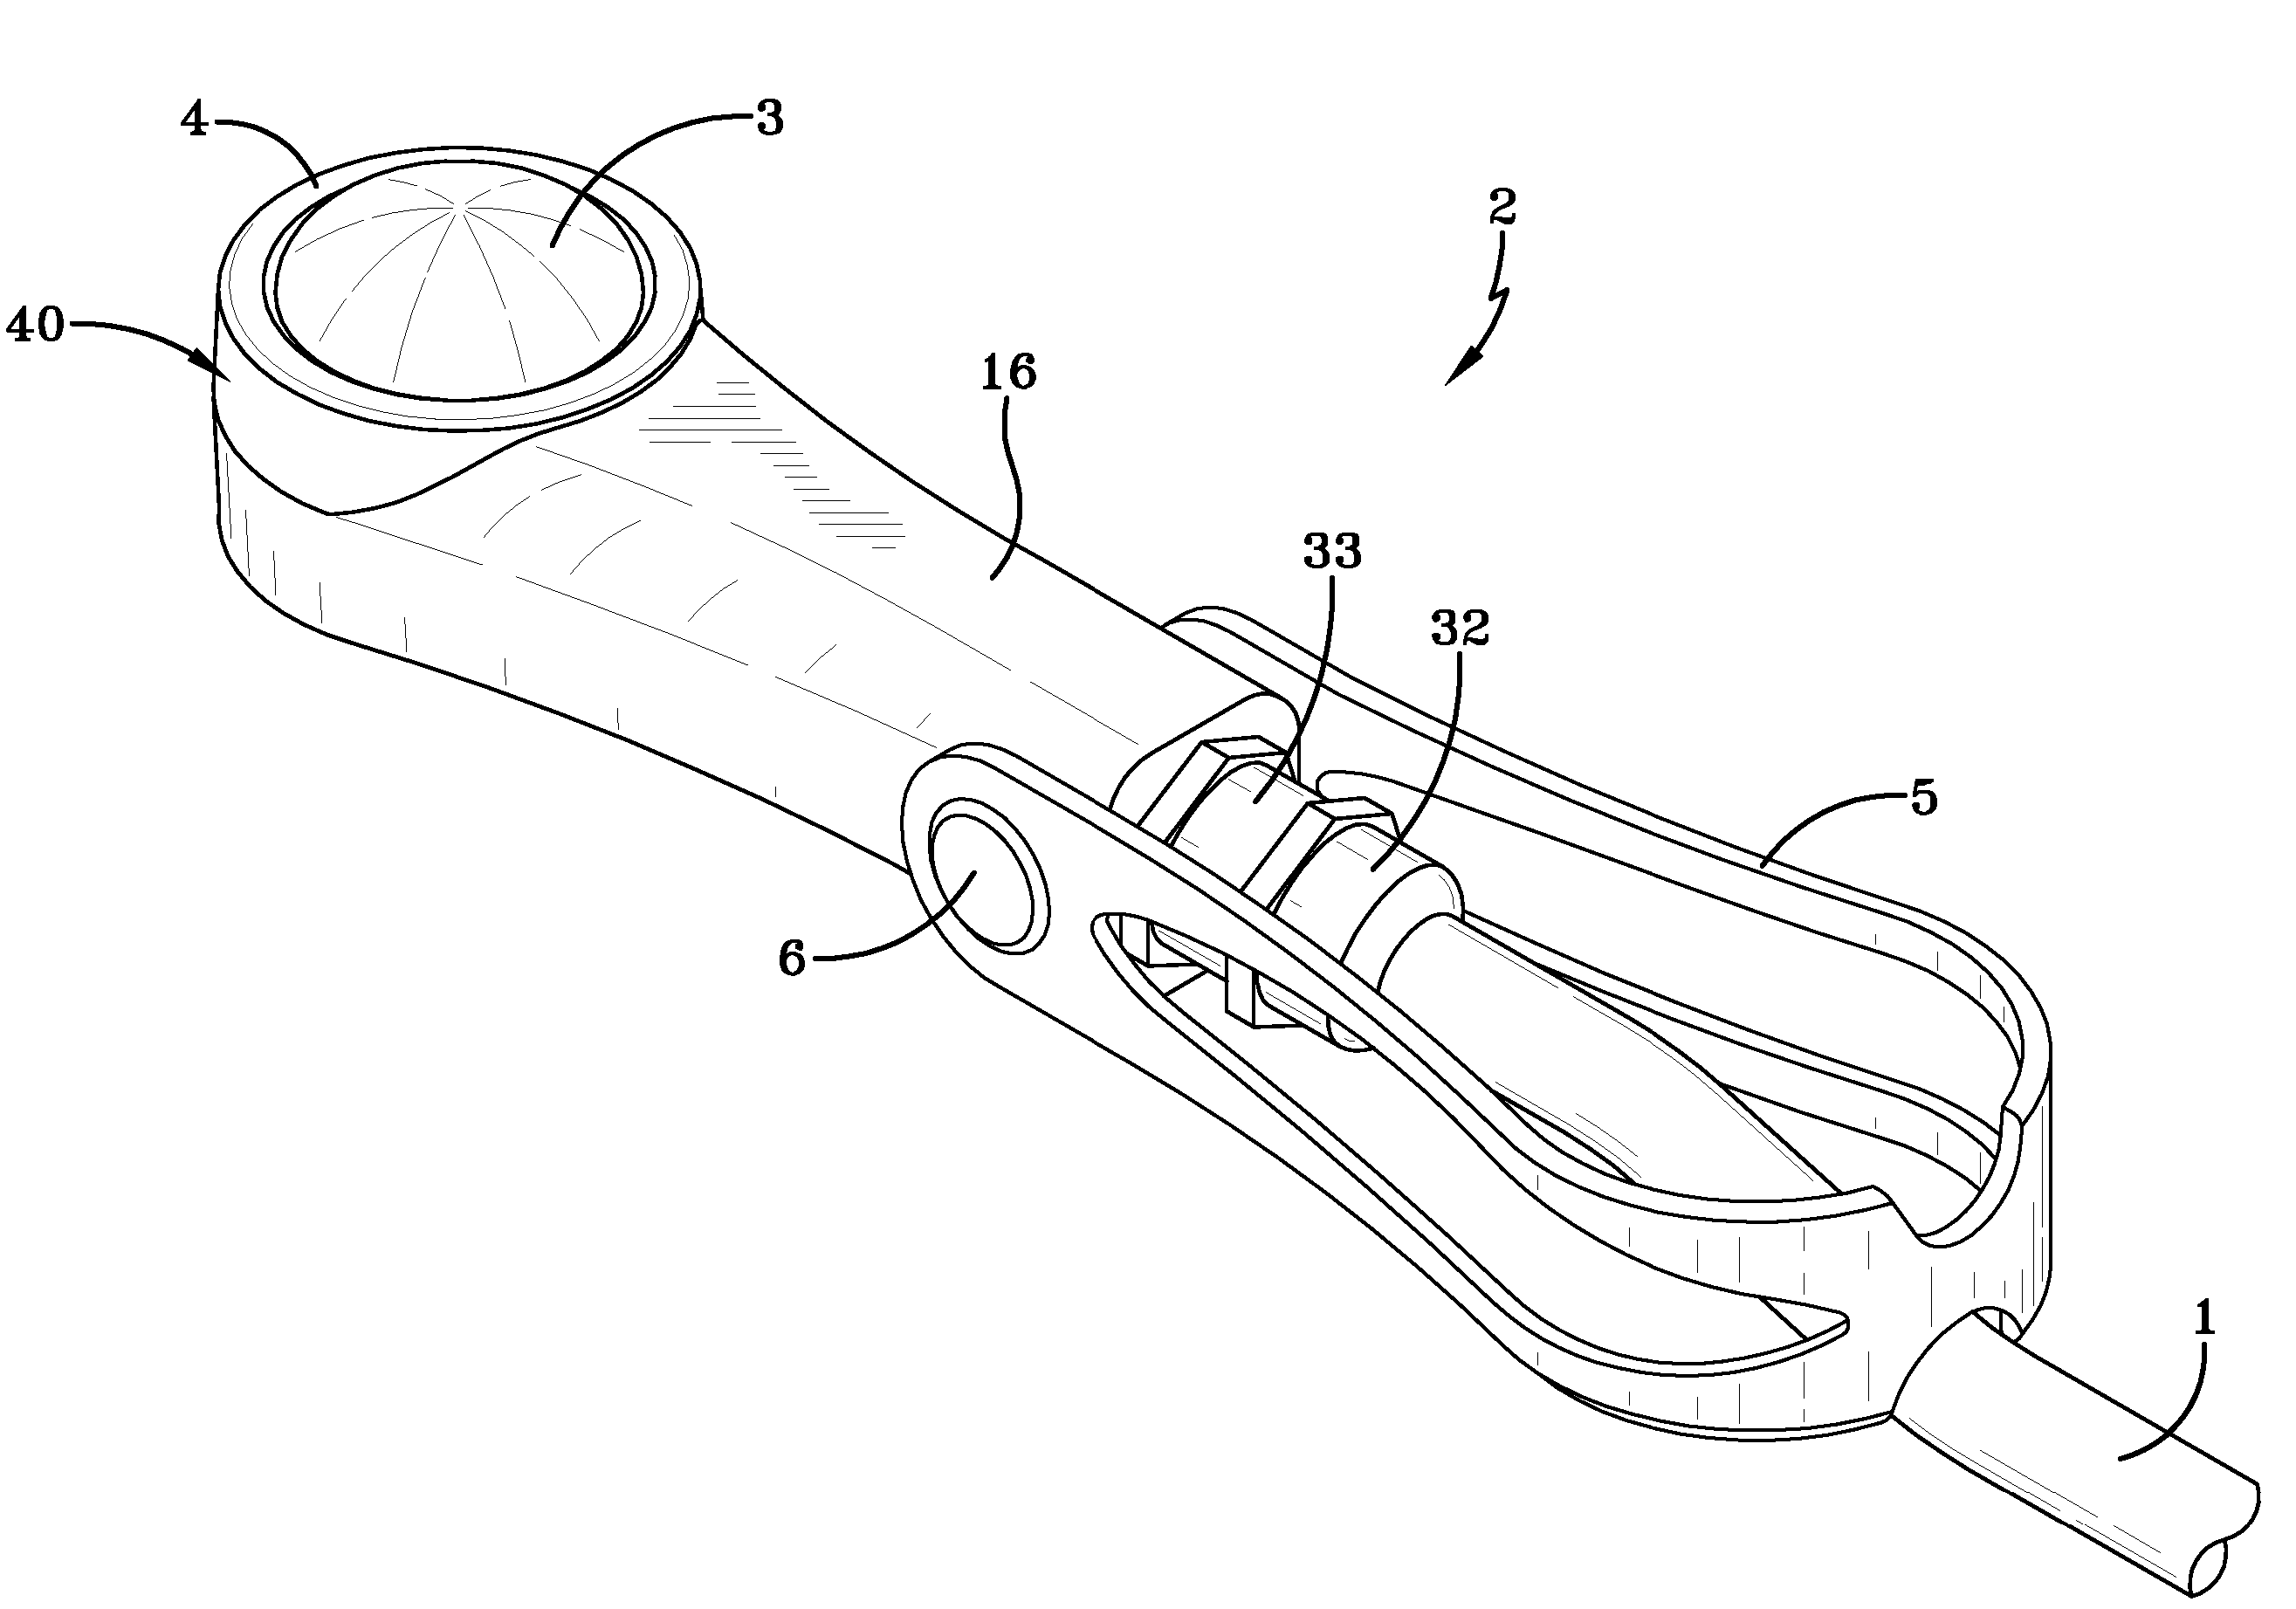 Shock Wave Treatment Device and Method of Use